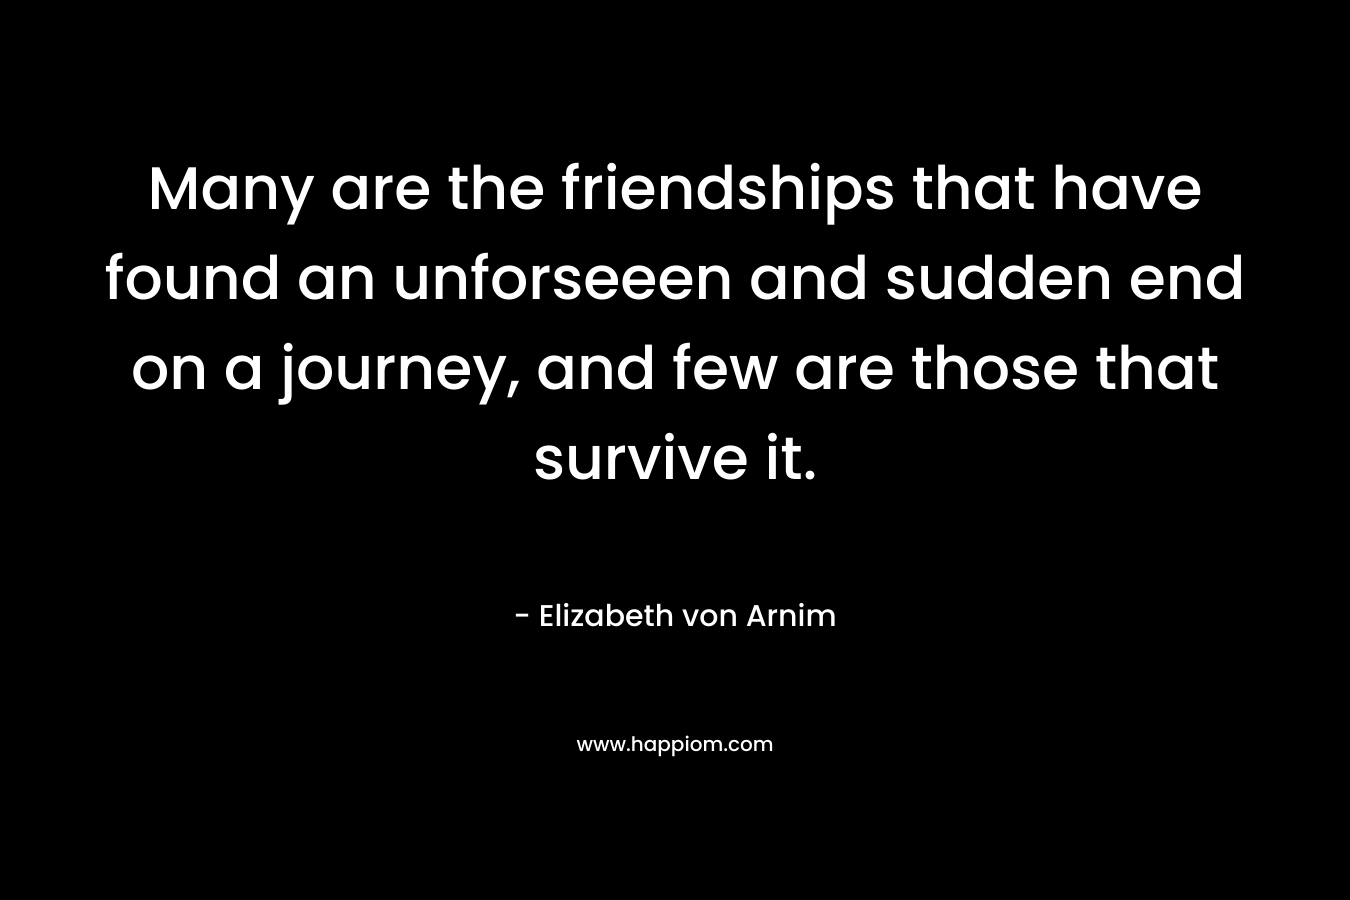 Many are the friendships that have found an unforseeen and sudden end on a journey, and few are those that survive it. – Elizabeth von Arnim